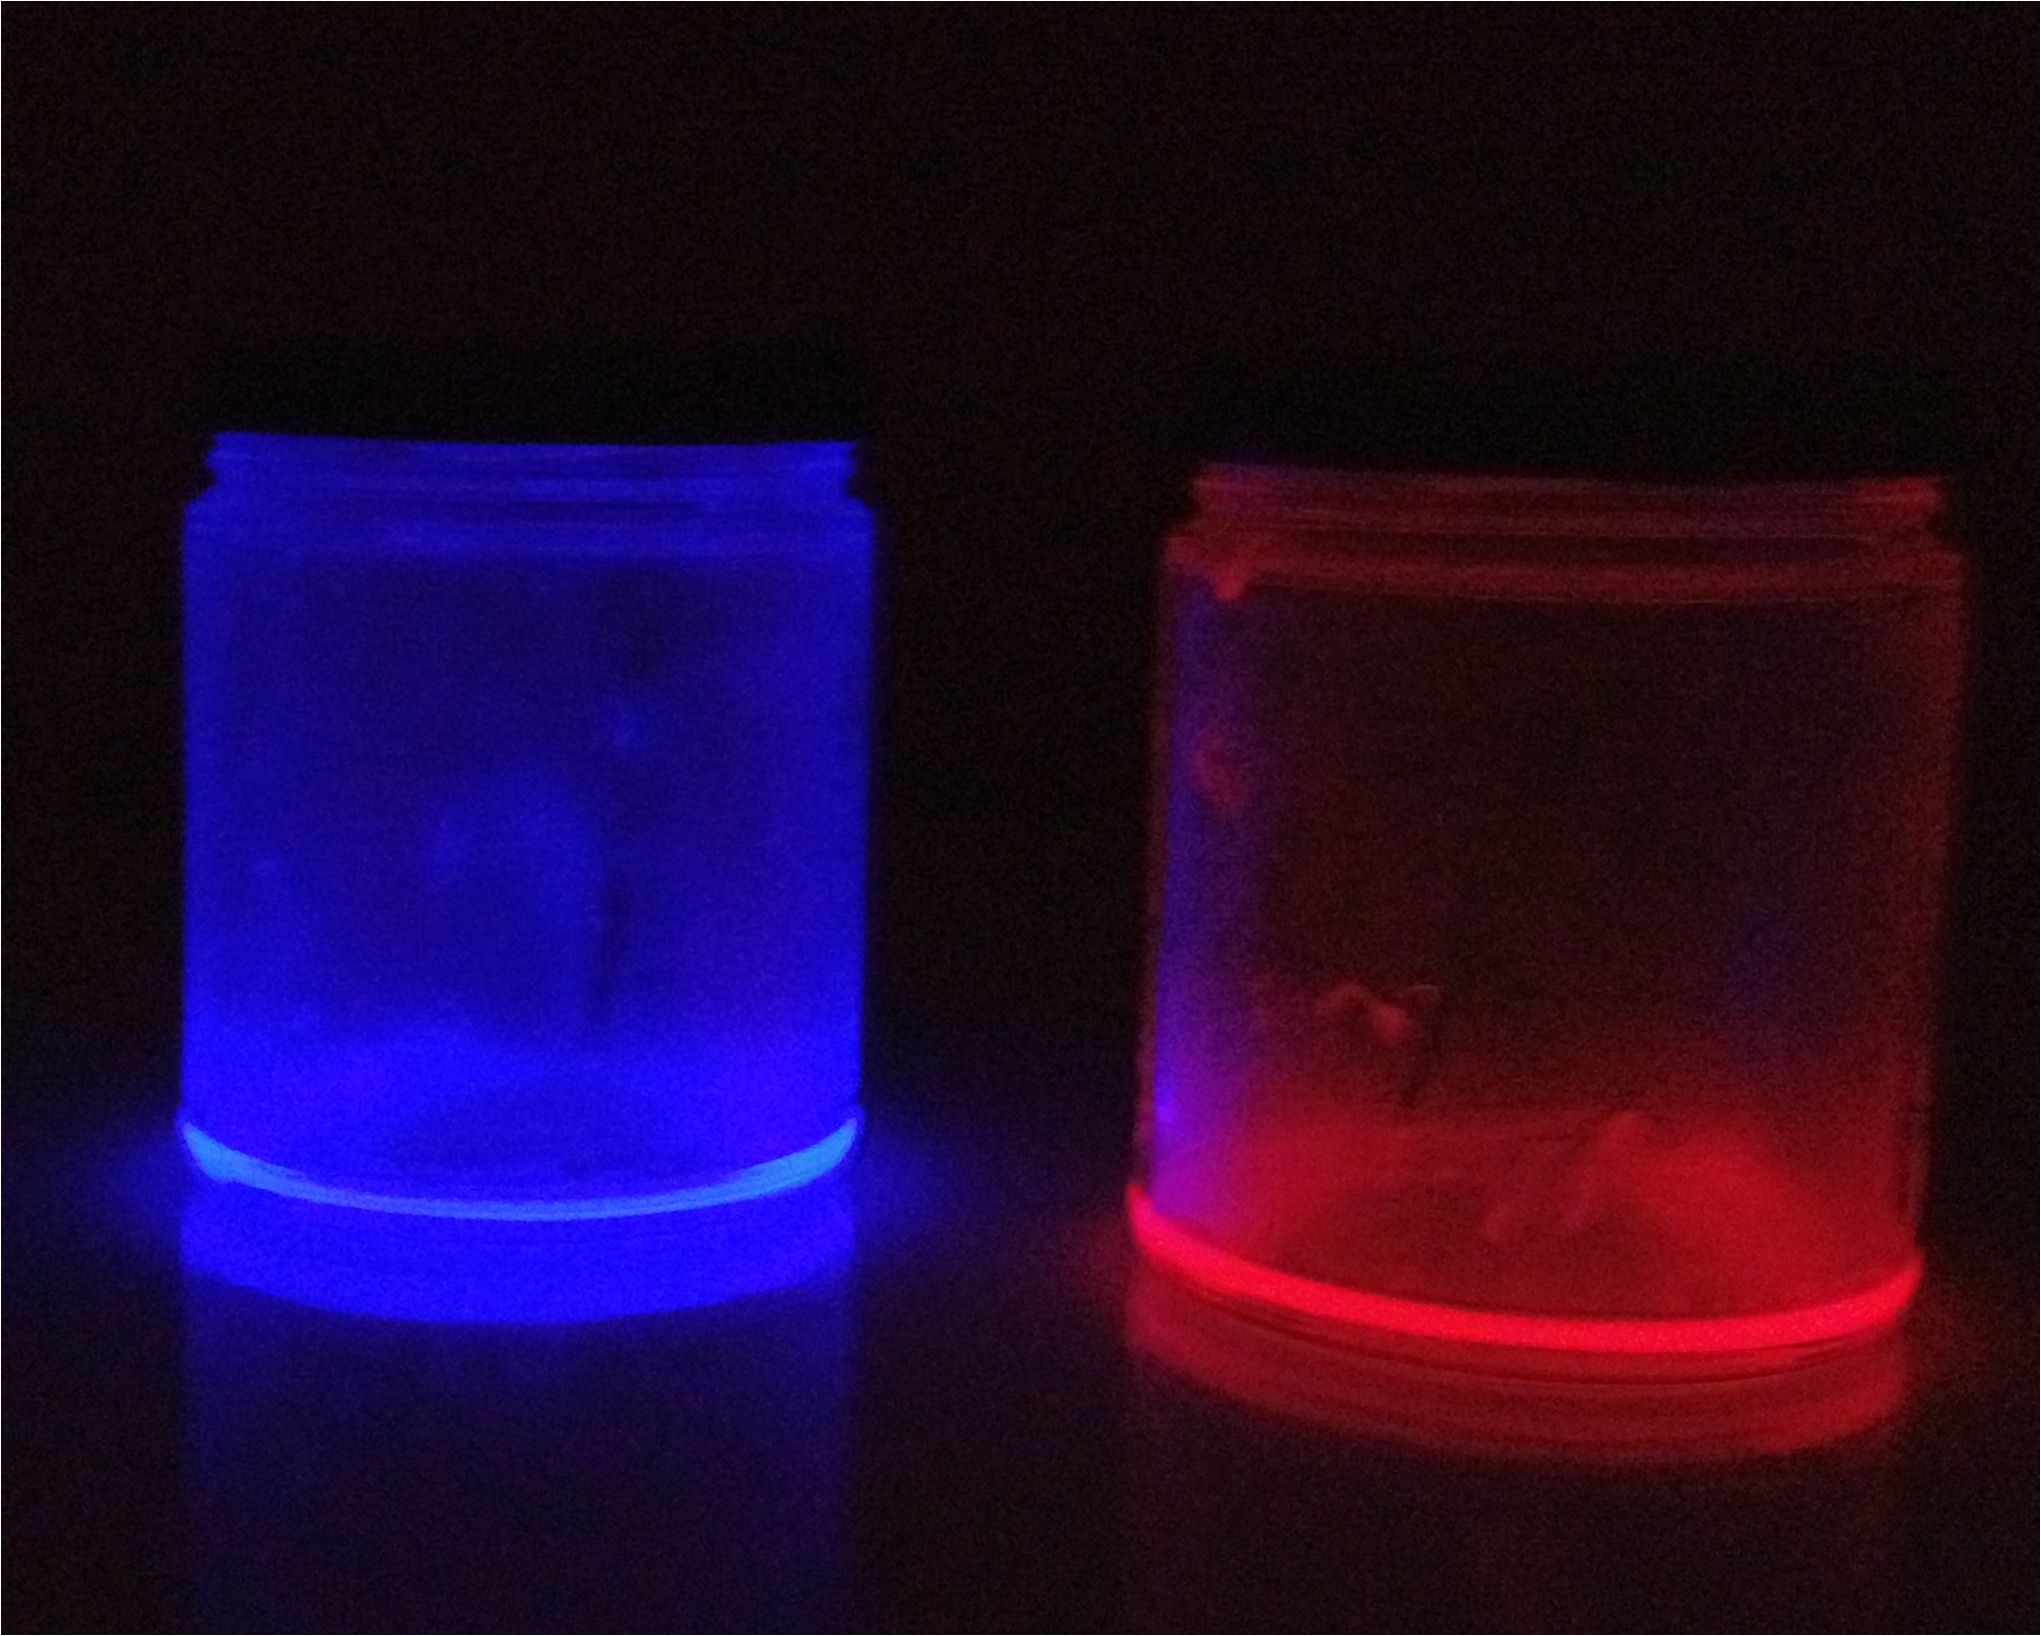 my kids and i made these funtimenight lights we washed out two empty glass spice jarsand then cut open glowsticks and poured them inside the jars and